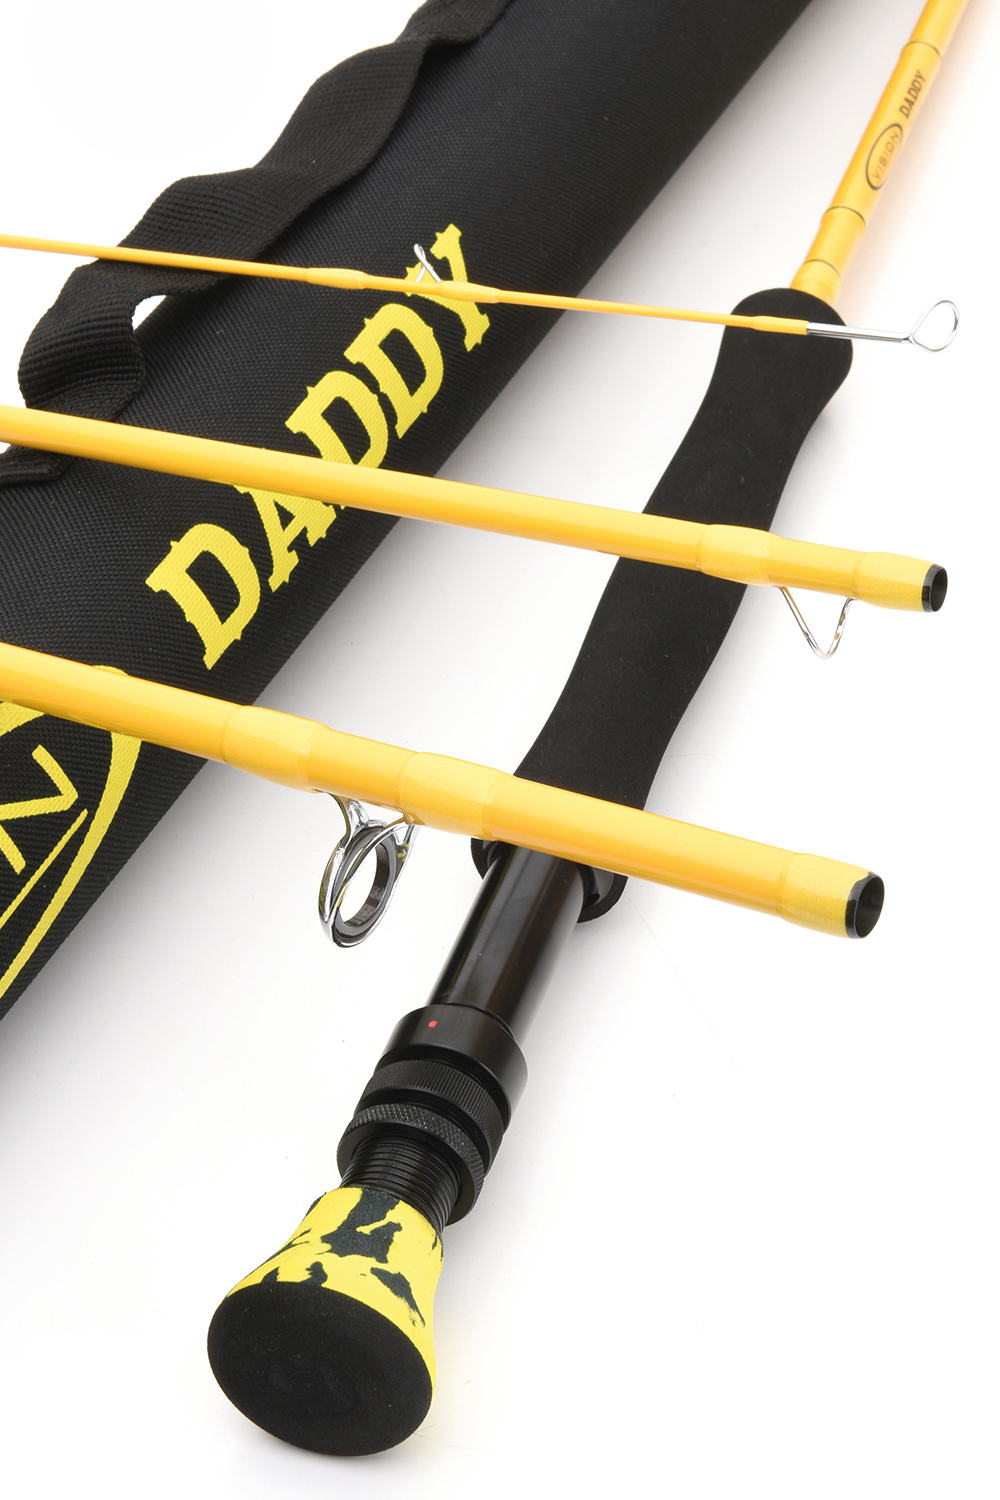 Vision Daddy Fly Rod 9 foot #9